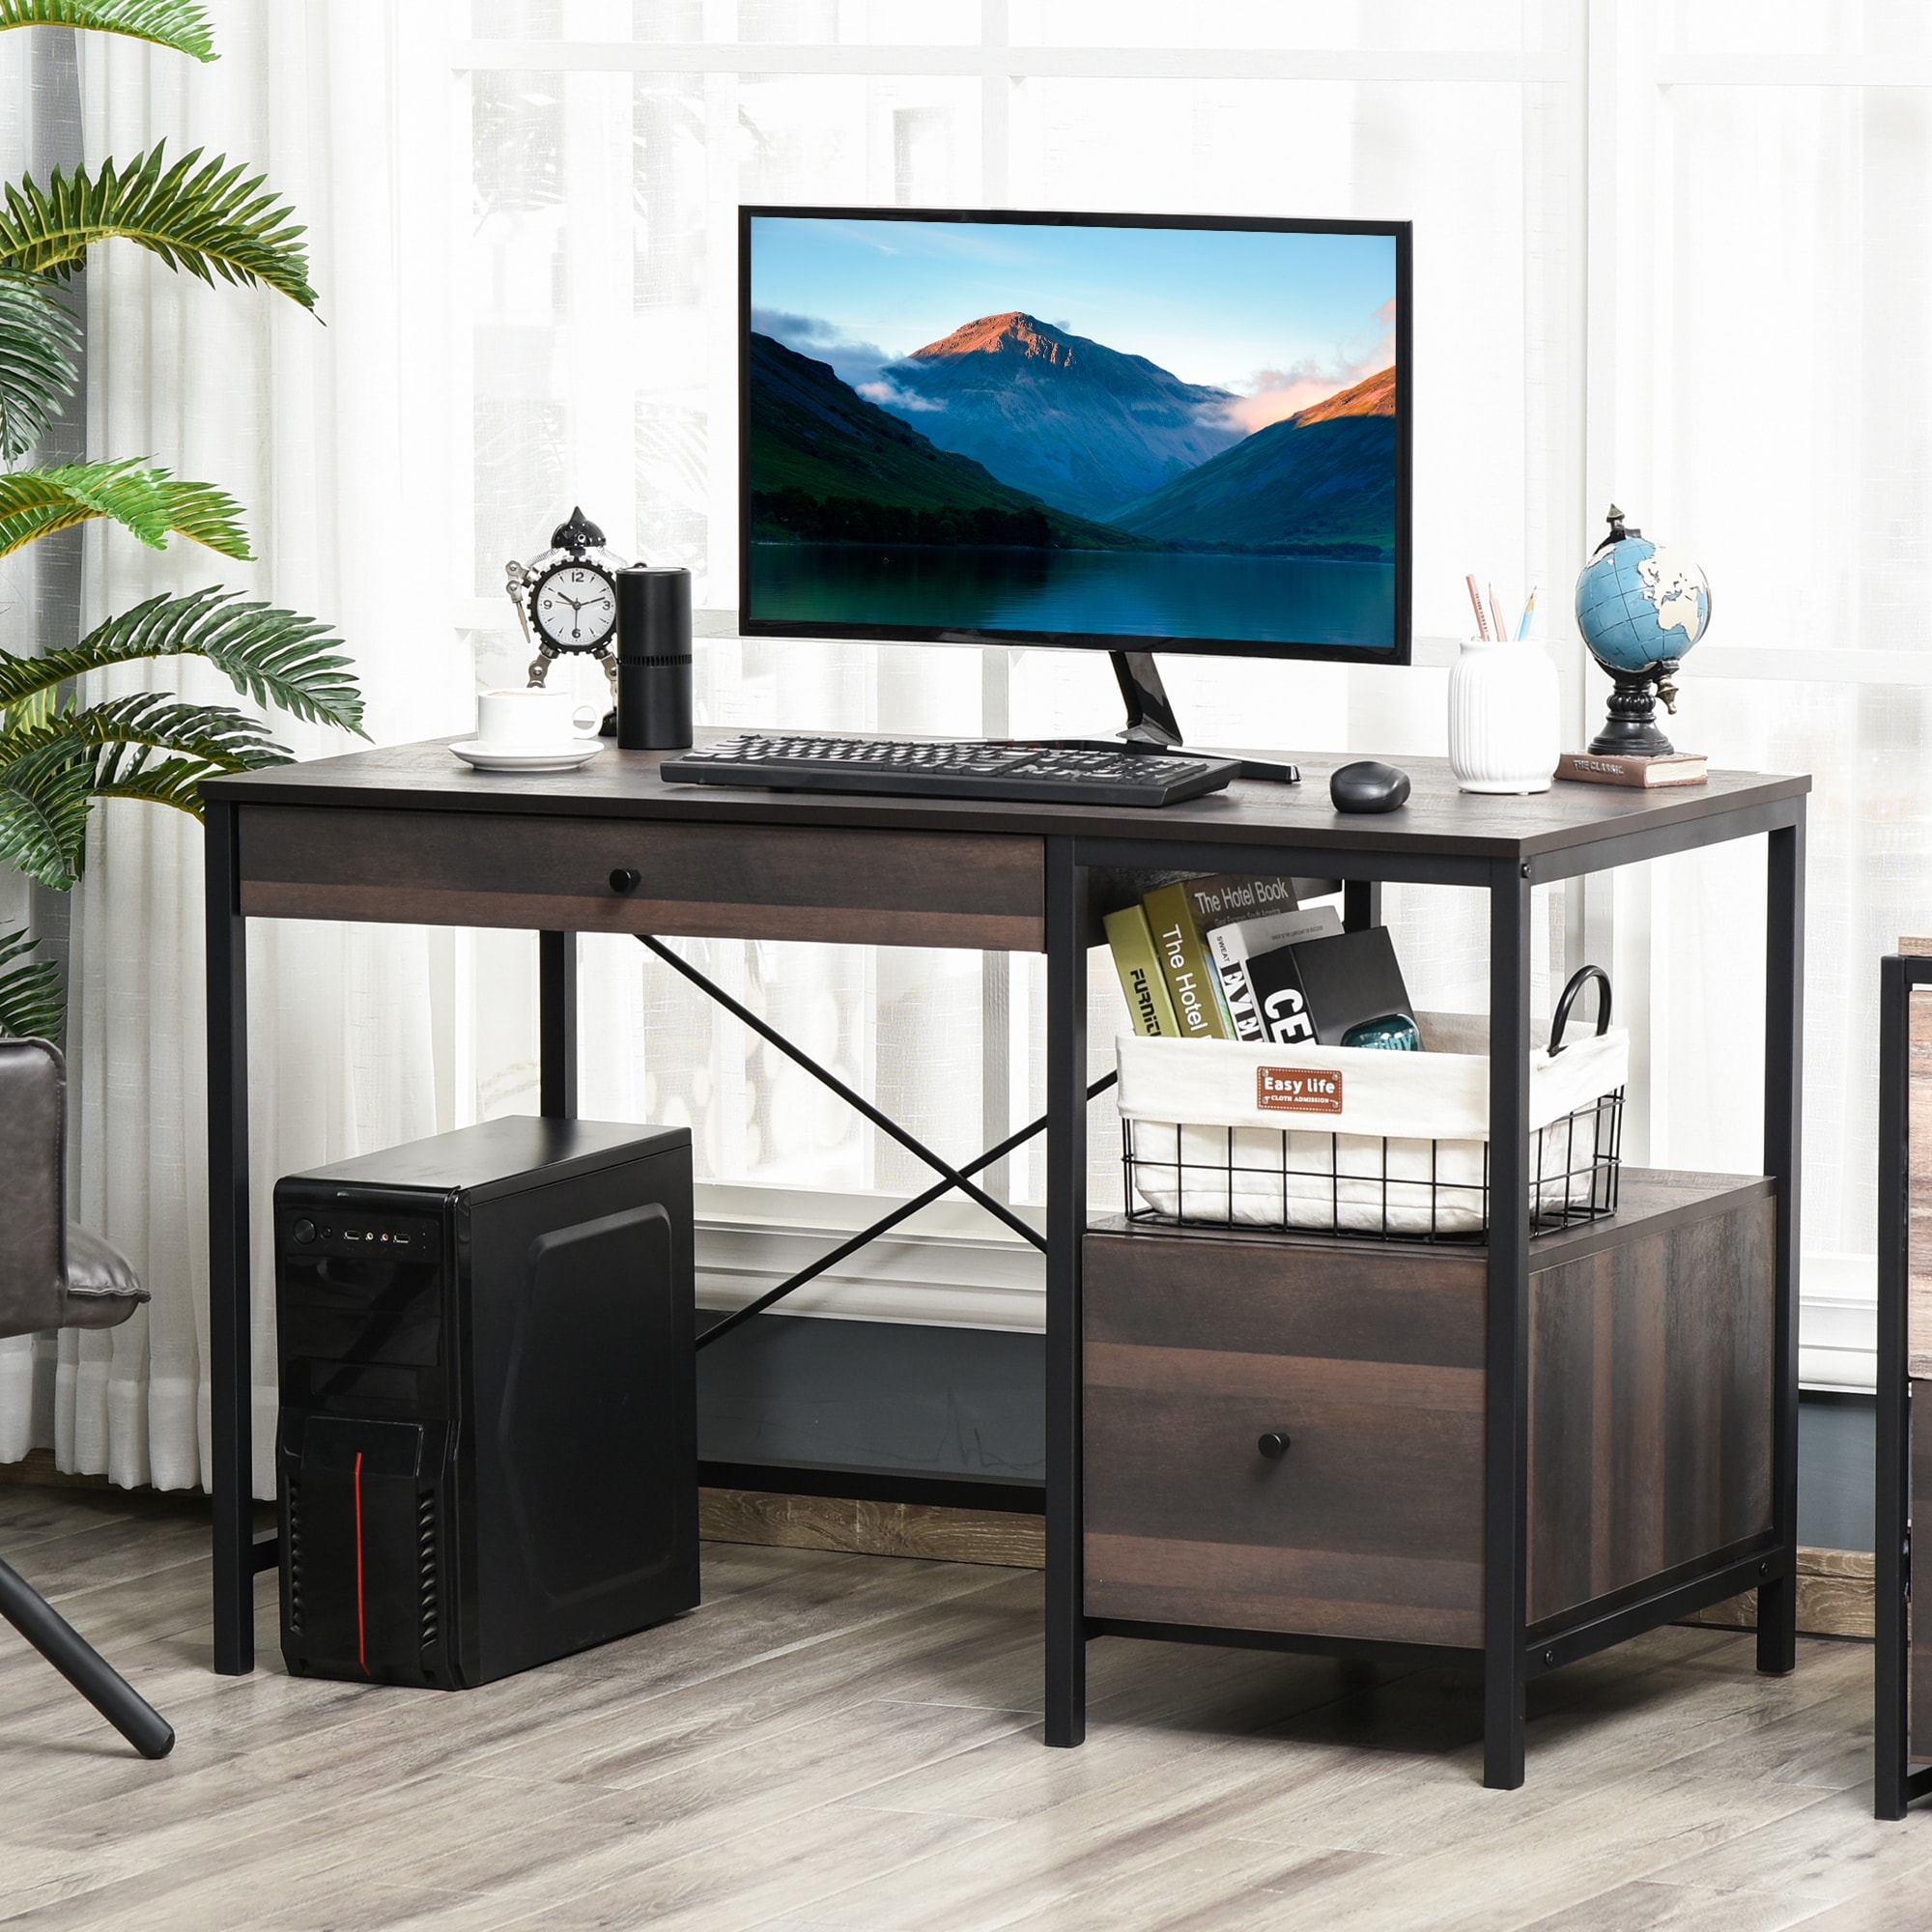 https://ak1.ostkcdn.com/images/products/is/images/direct/bb9ba758d6f1f4597b942535ba904d0a74b832d1/HOMCOM-Home-Office-Writing-Desk-with-File-Storage-Drawer-for-Letter-Size%2C-PC-Study-Table-Computer-Workstation%2C-Walnut-Brown.jpg